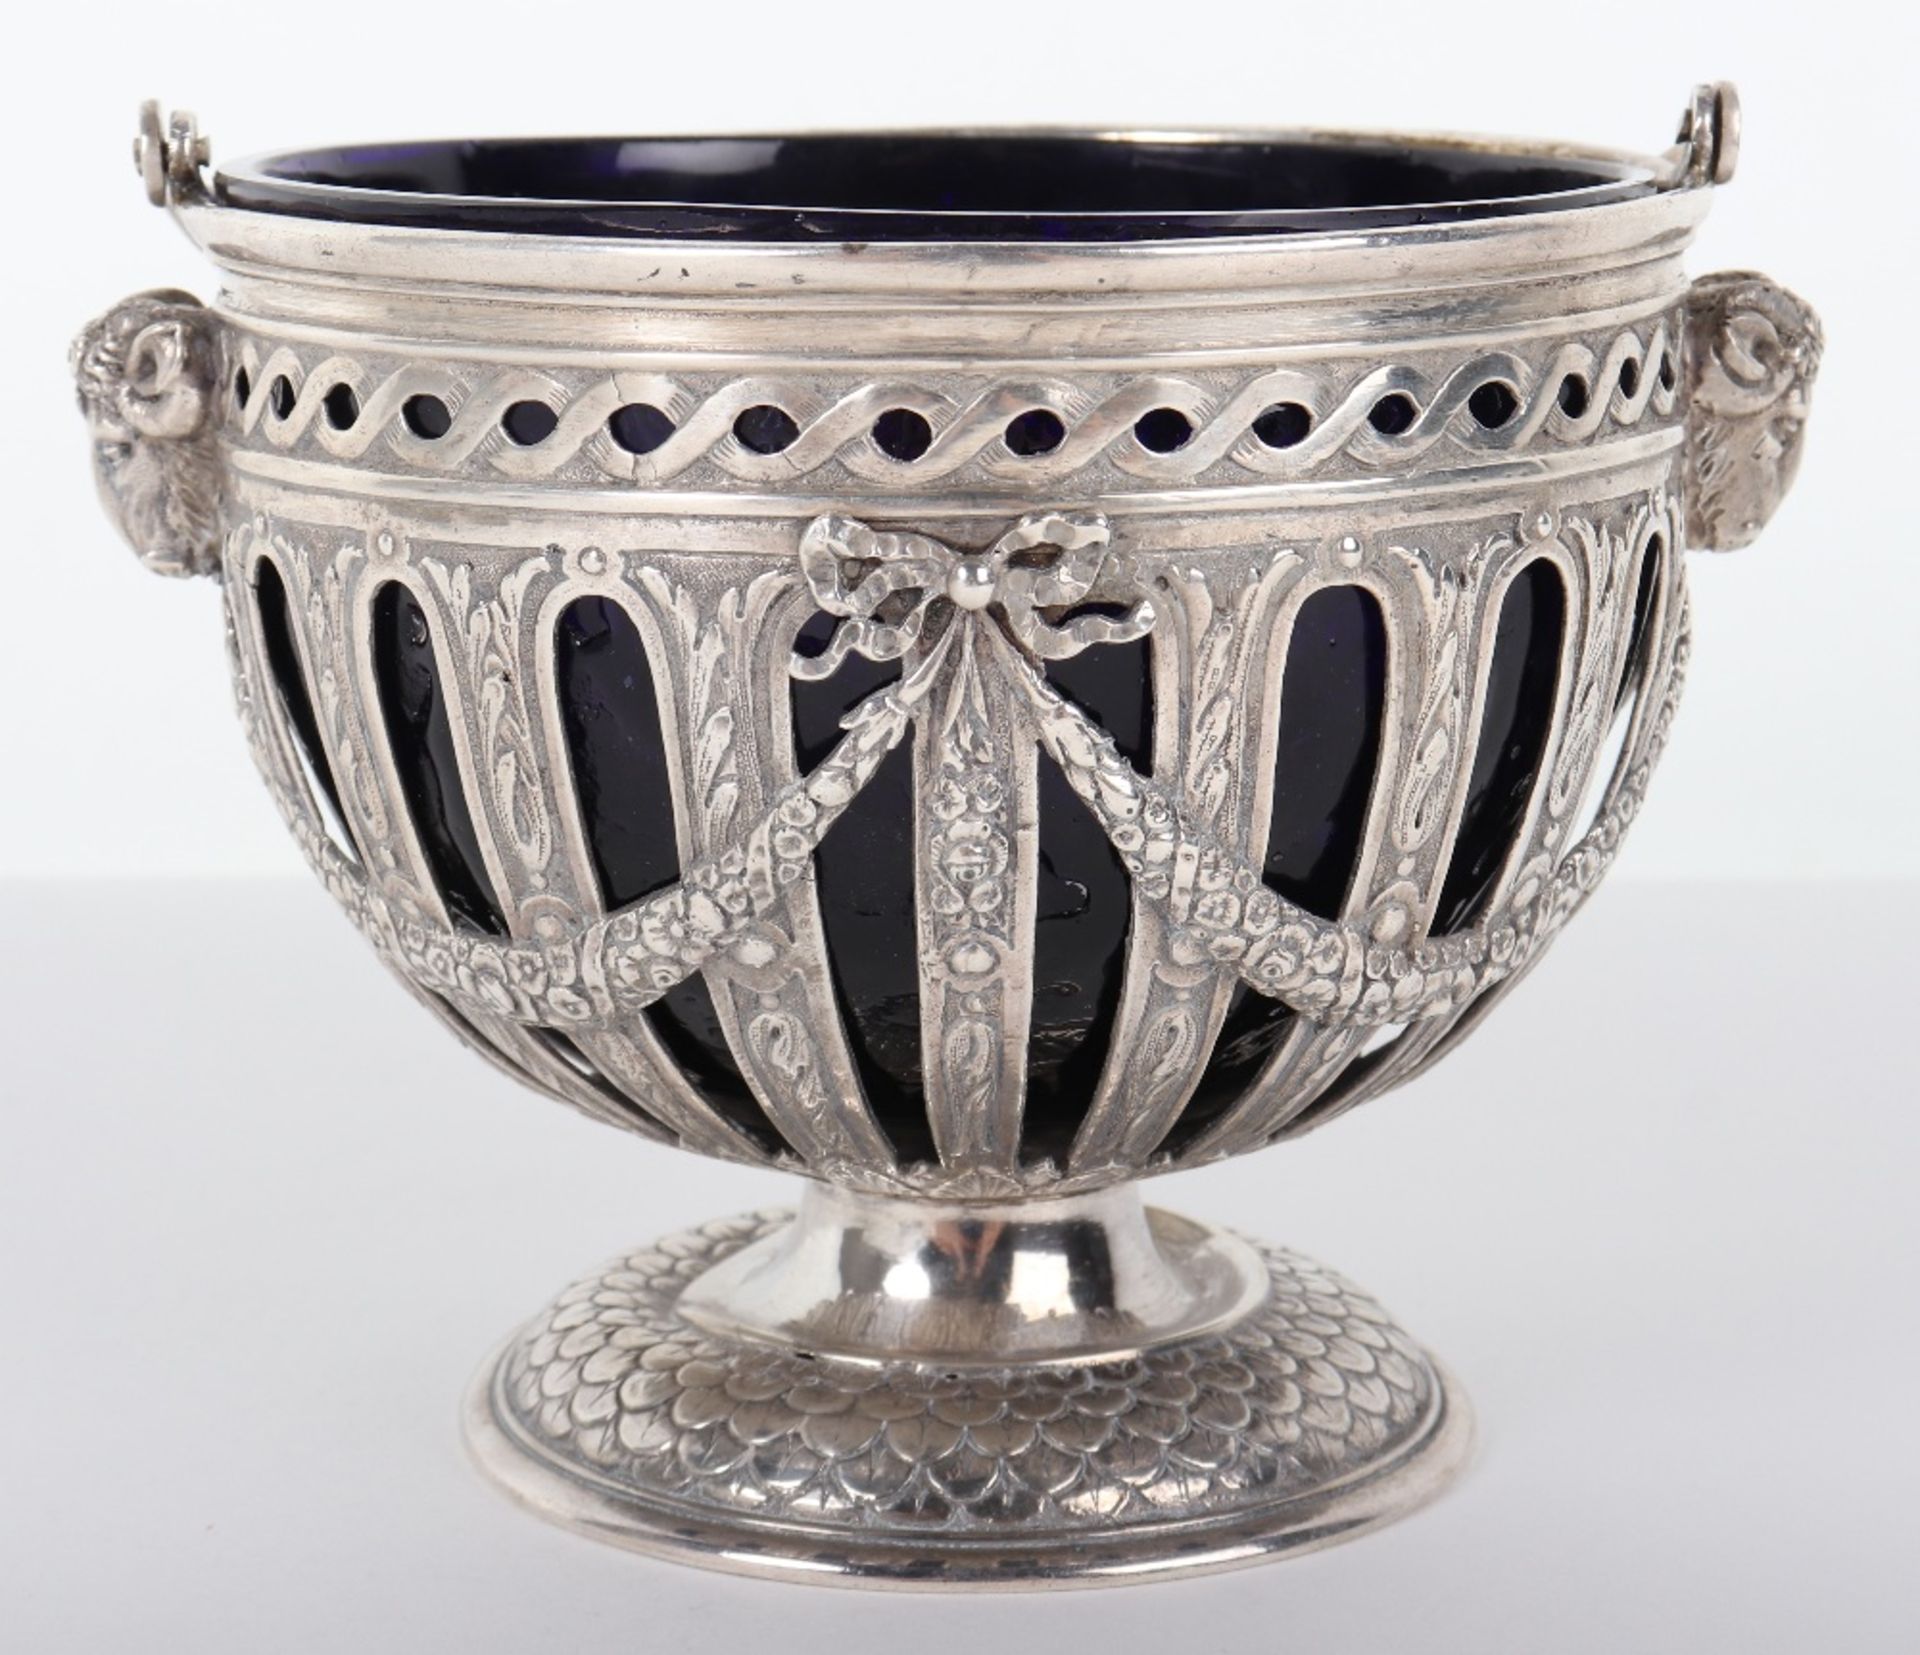 An unusual early 20th century silver and glass sugar bowl marked 930 to base, London 1902, John Geor